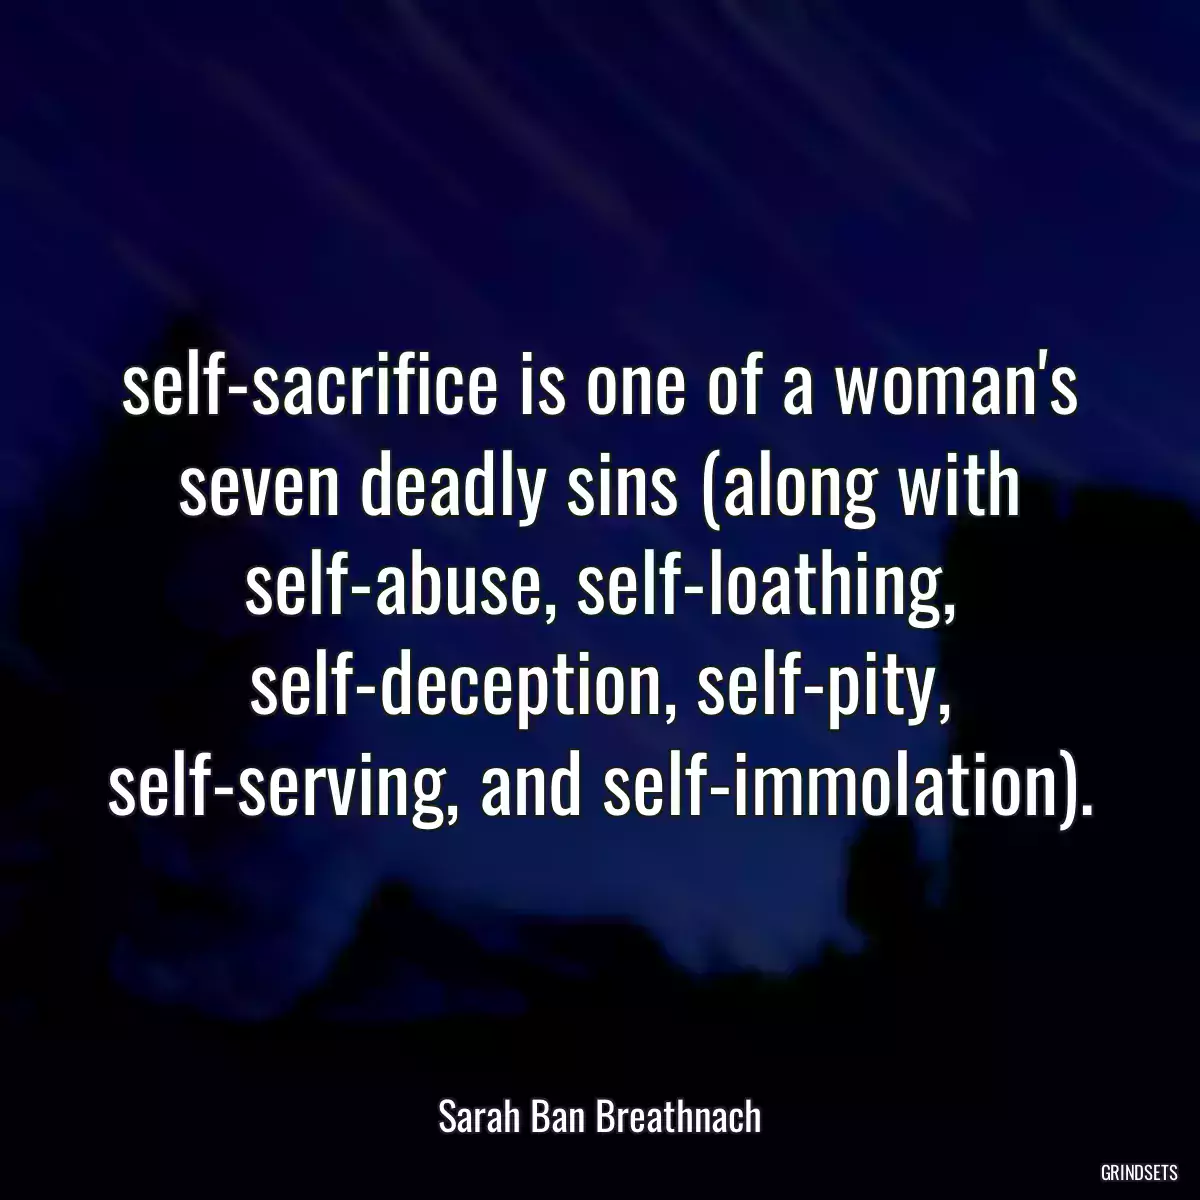 self-sacrifice is one of a woman\'s seven deadly sins (along with self-abuse, self-loathing, self-deception, self-pity, self-serving, and self-immolation).